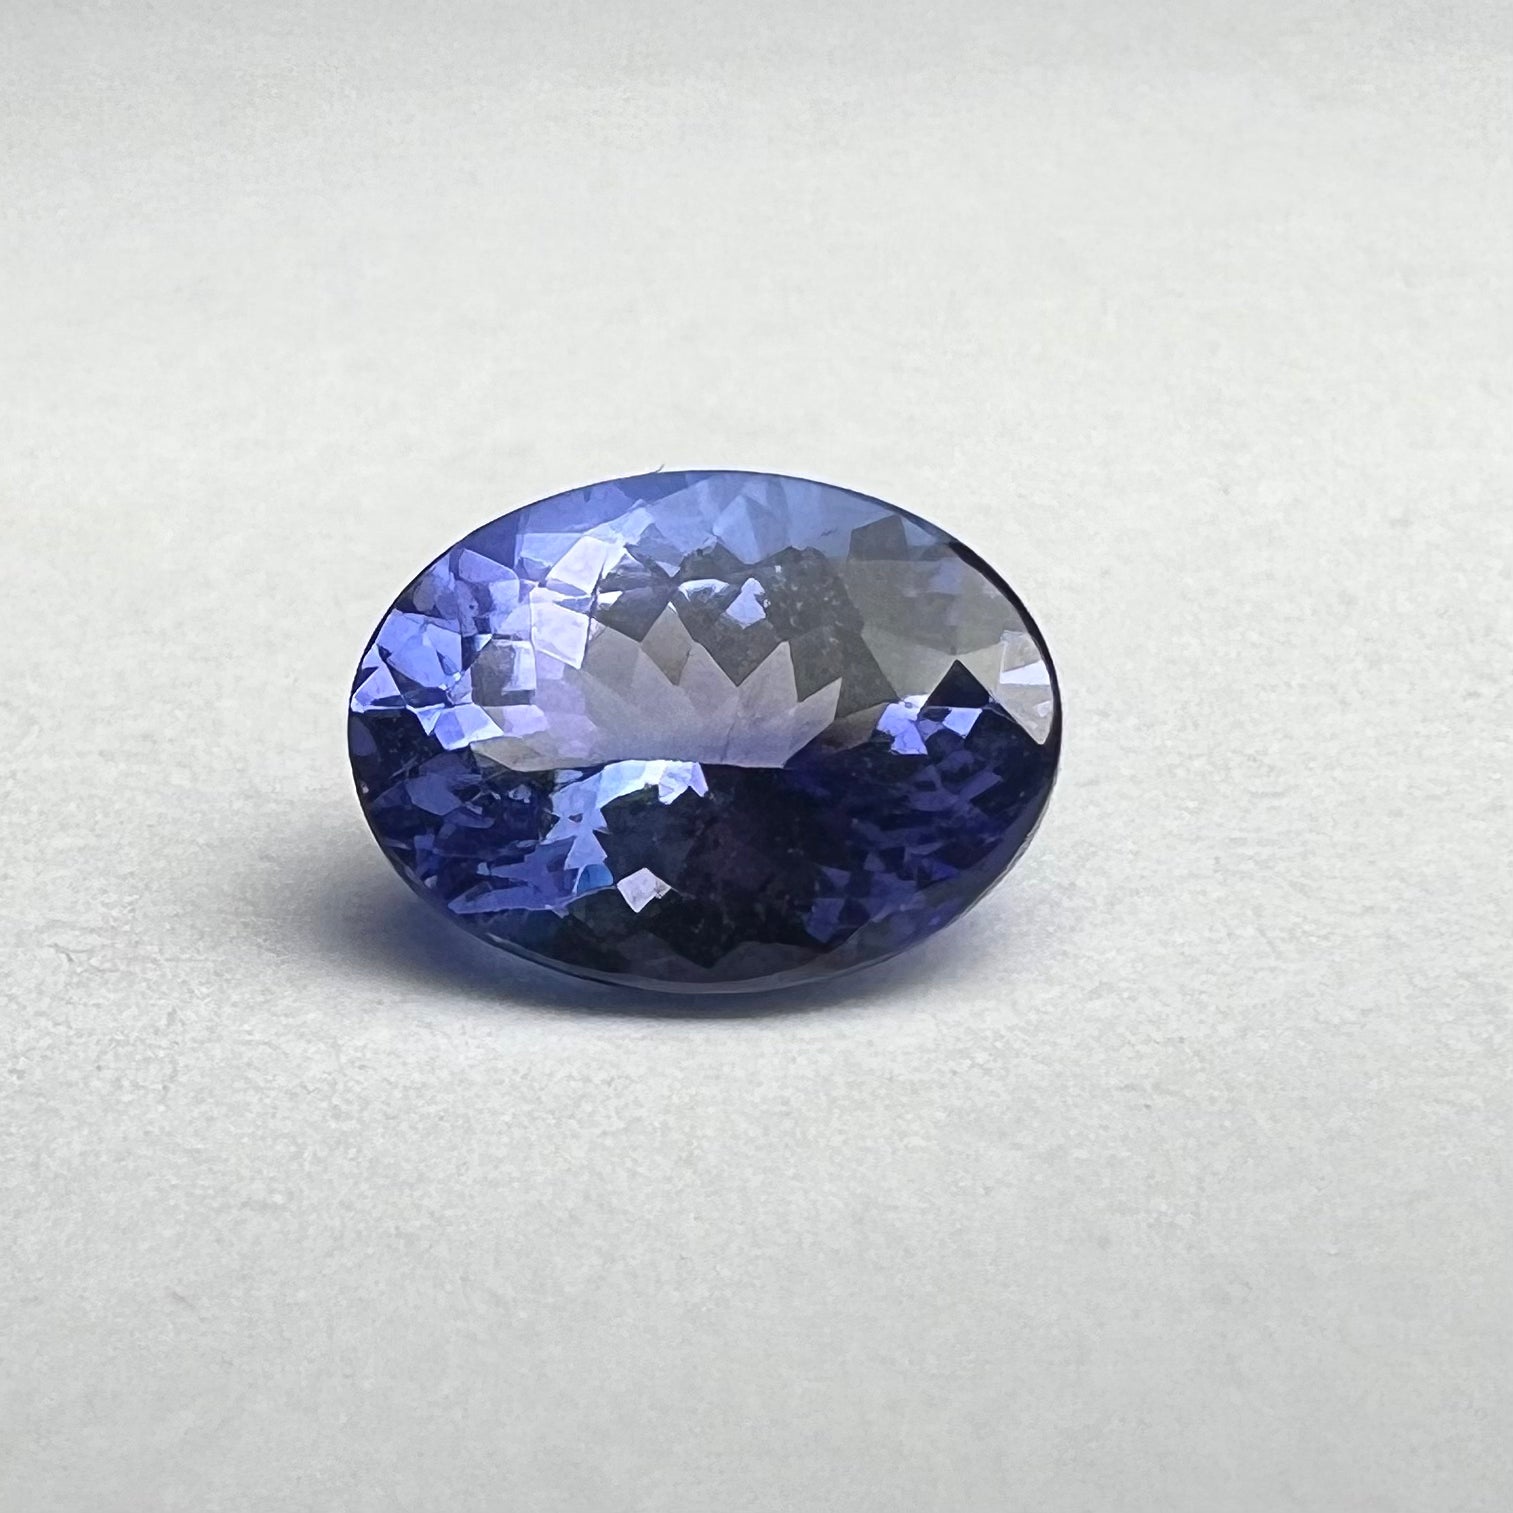 1.46CTW Loose Natural Oval Tanzanite 7.99x6.03x4.28mm Earth mined Gemstone